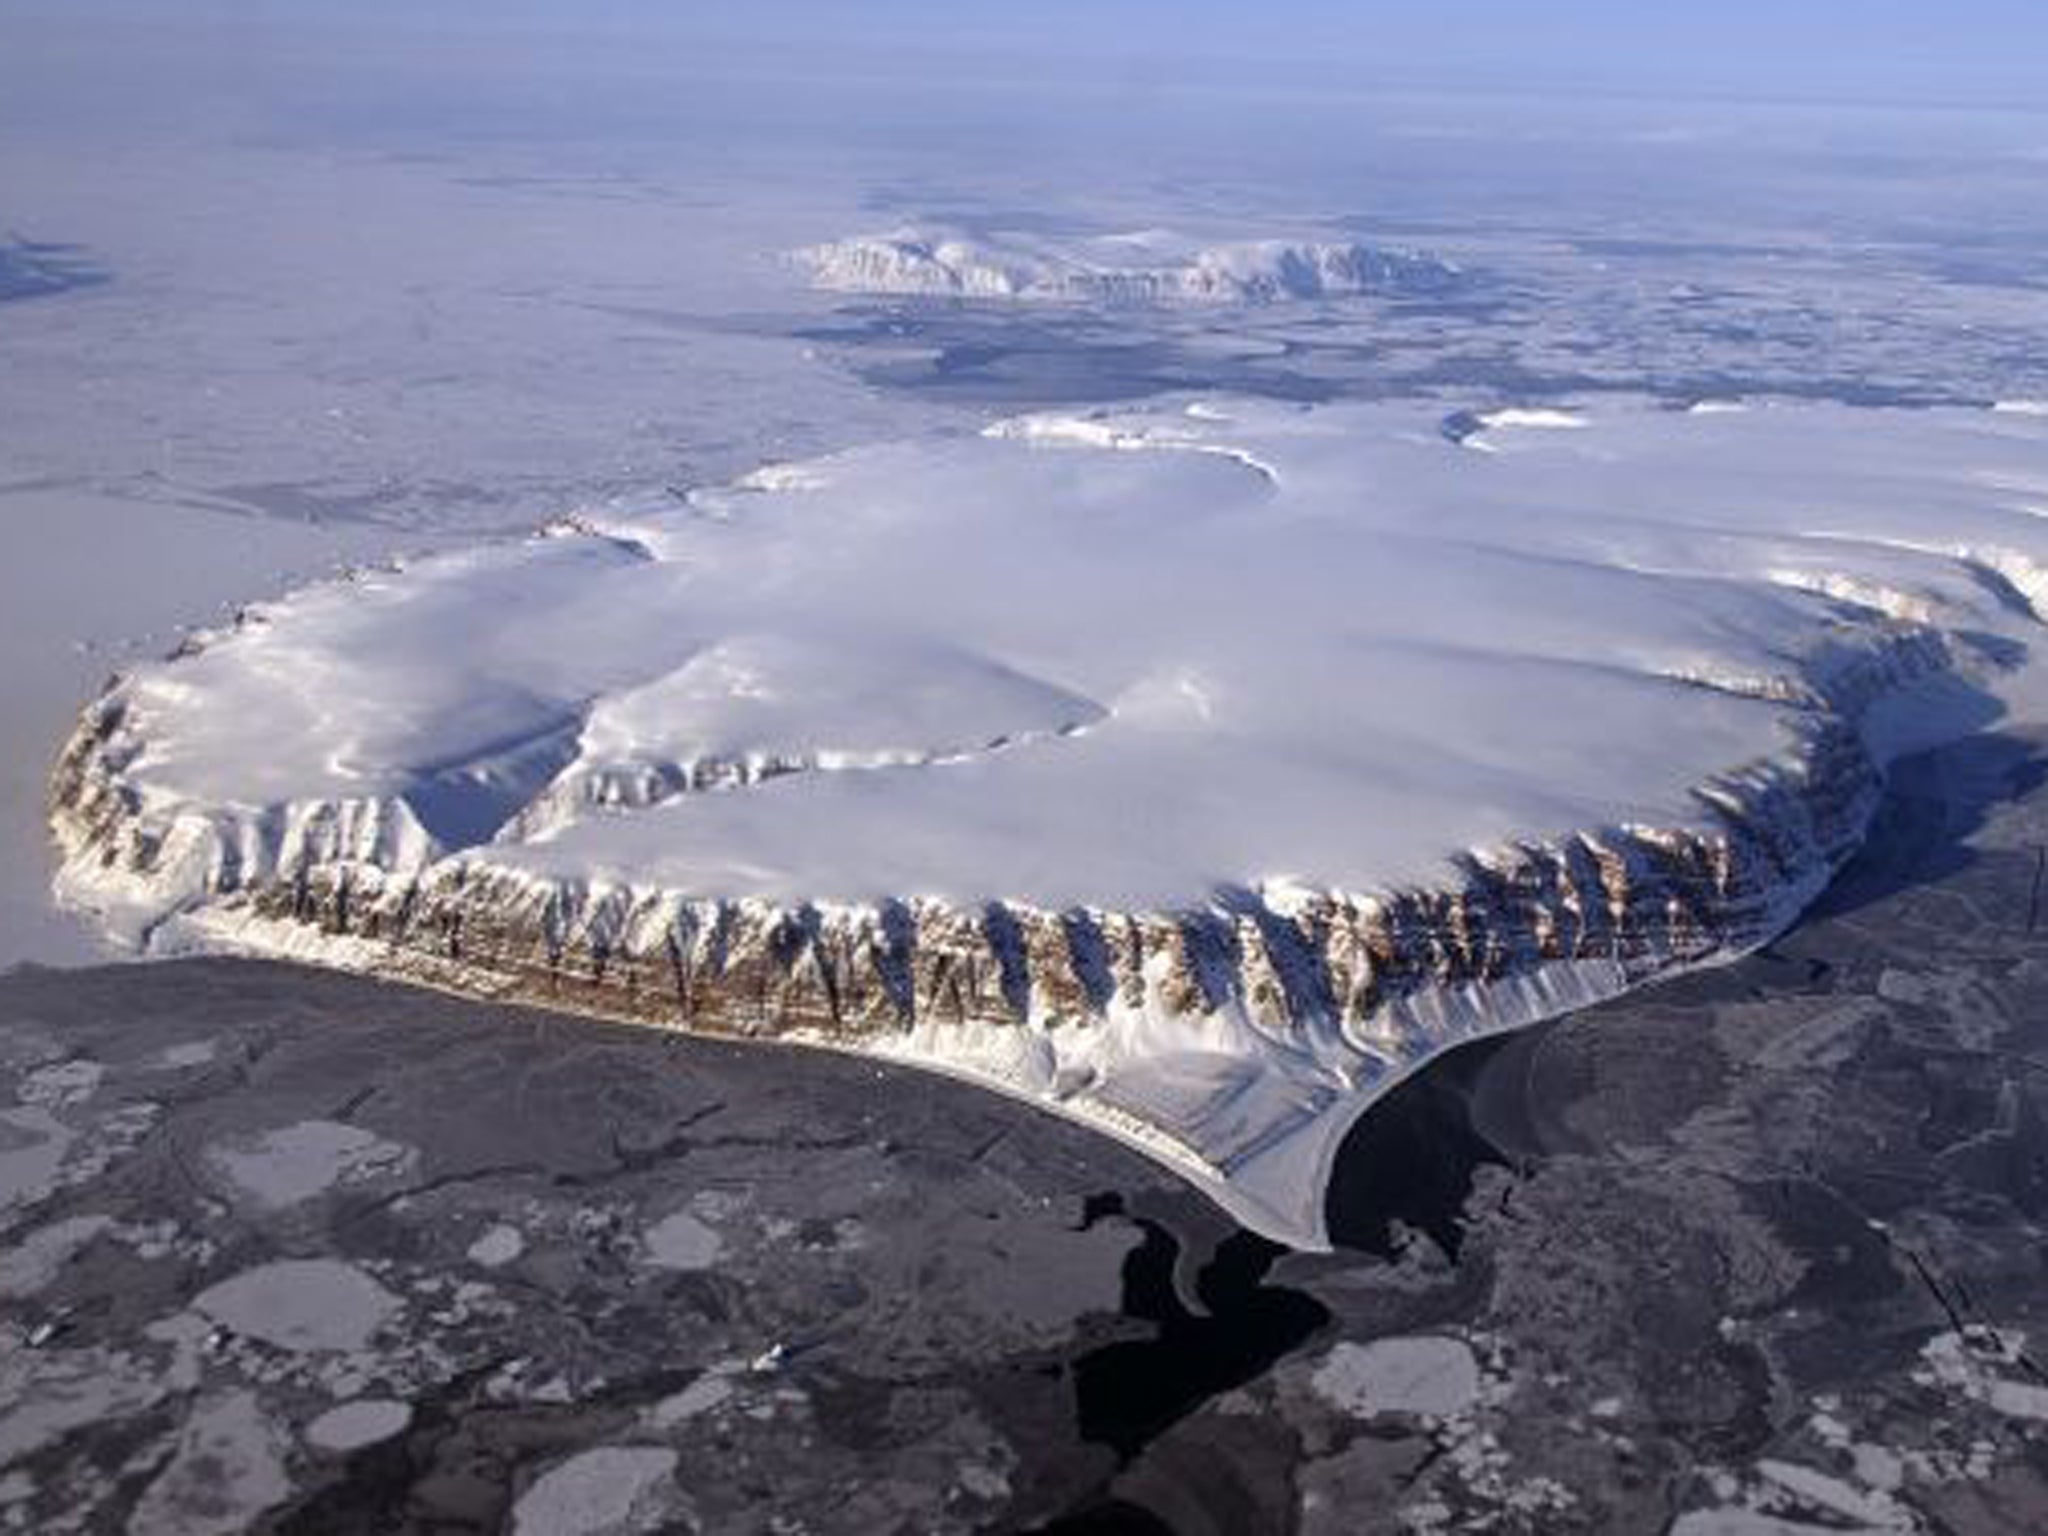 This Nasa image from 20 April 2013 shows Saunders Island and Wolstenholme Fjord with Kap Atholl in the background seen during an IceBridge survey flight near Qaasuitsup, Greenland